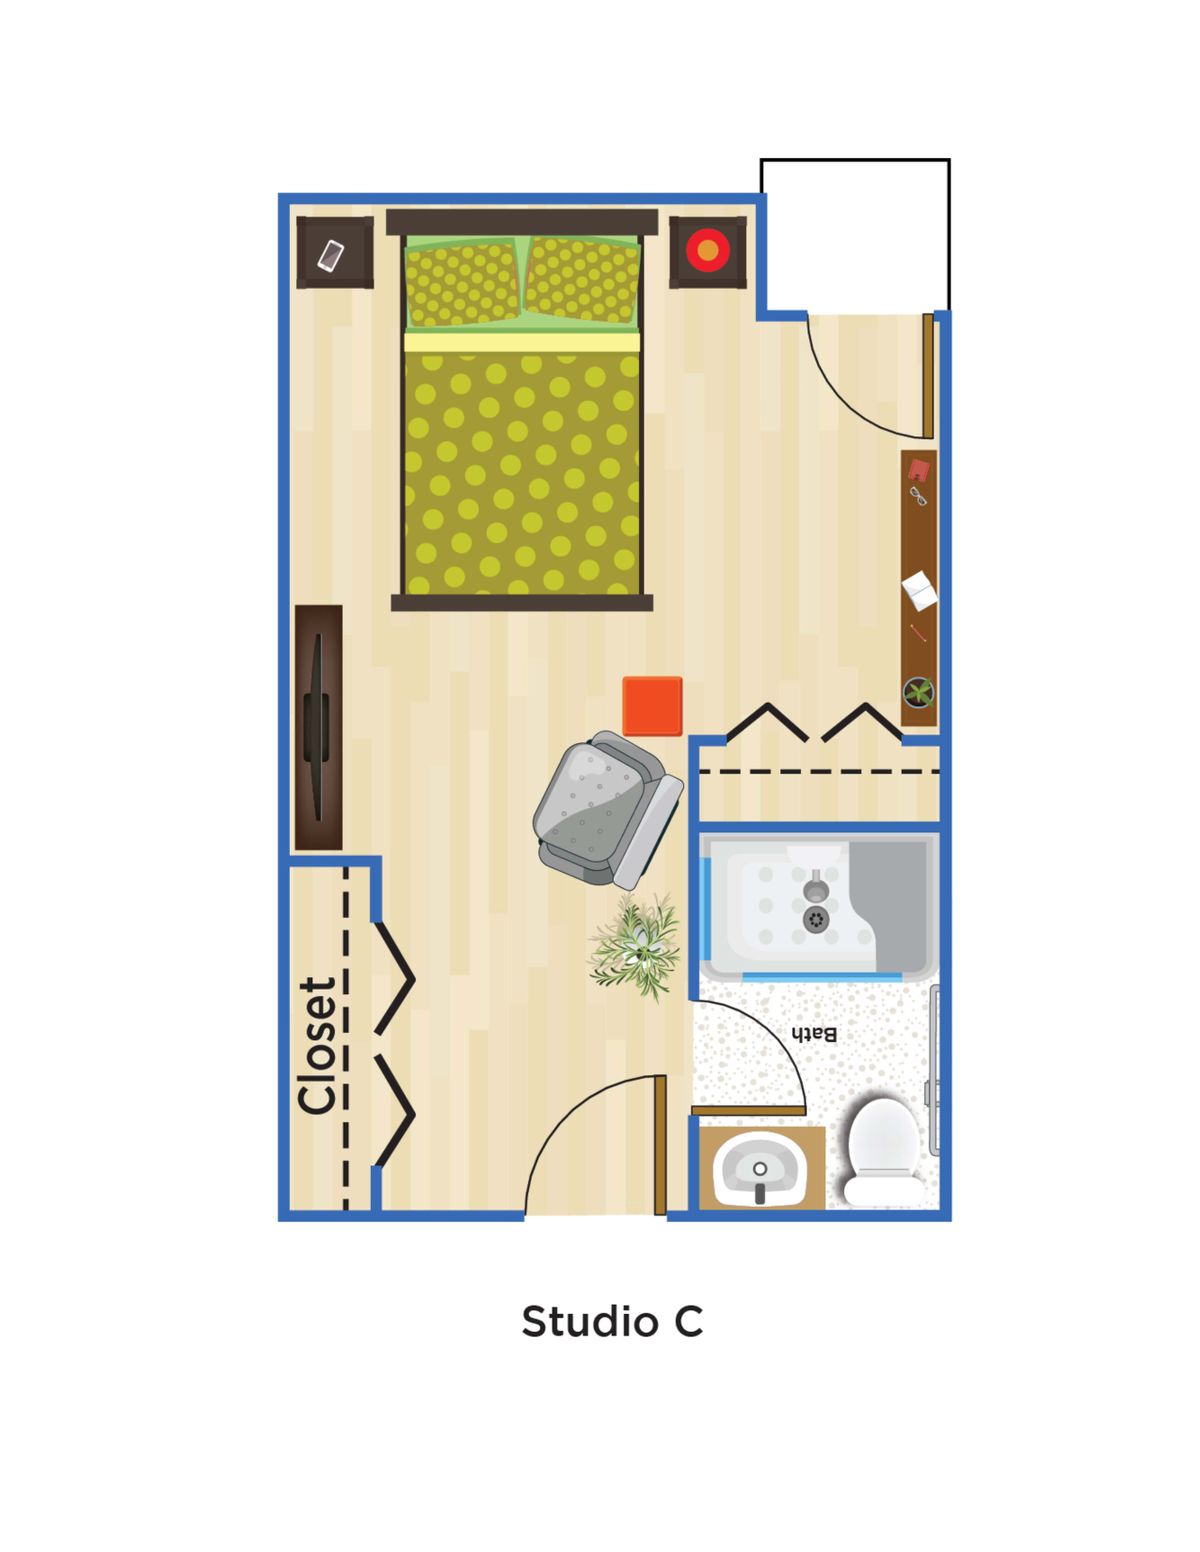 Dimensions are approximate. Floor plans may vary.